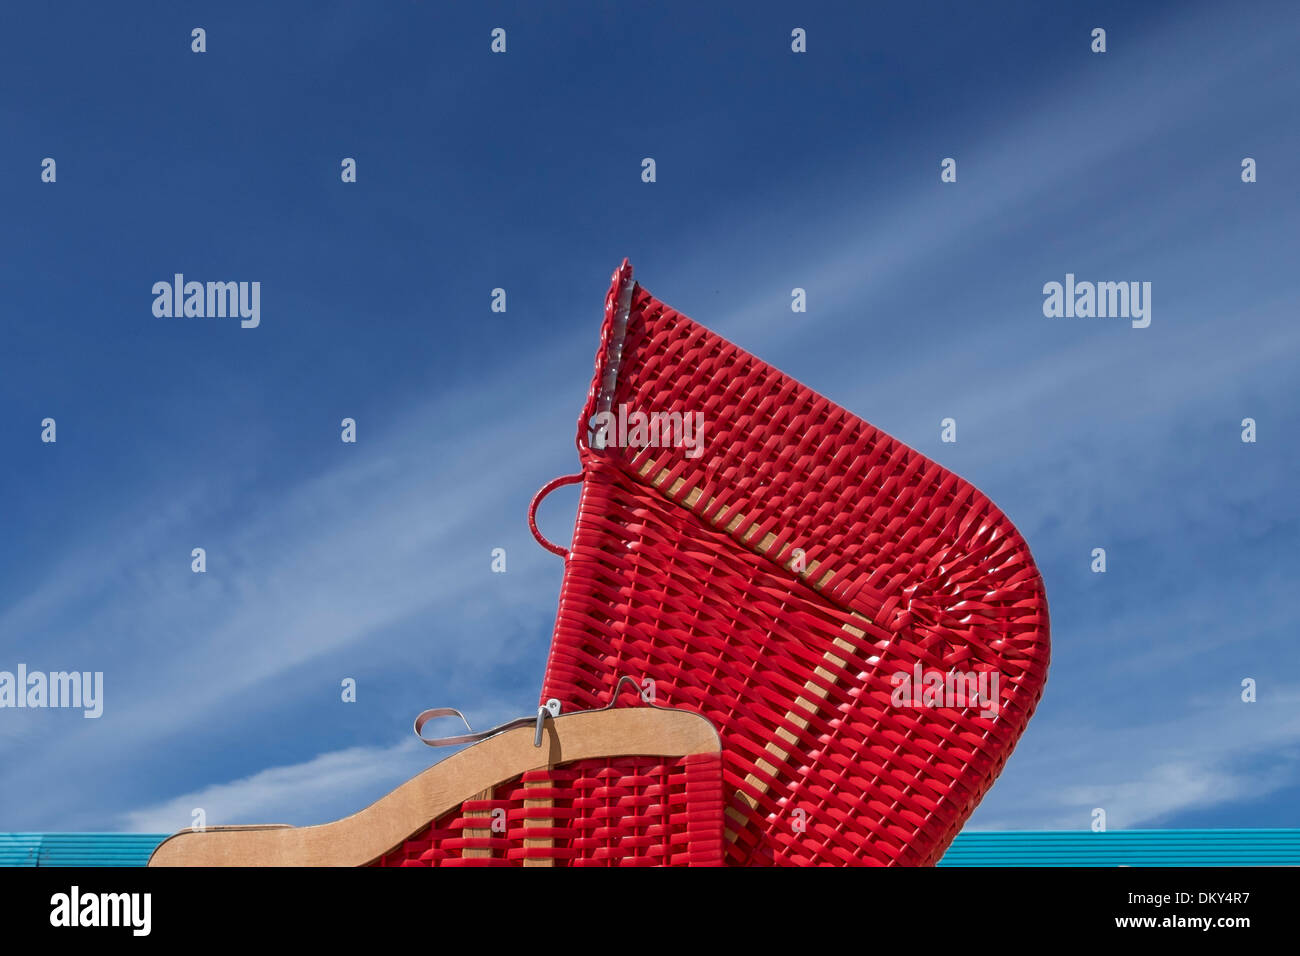 Red beach chair in front of blue sky, beach club, Hamburg Germany Stock Photo